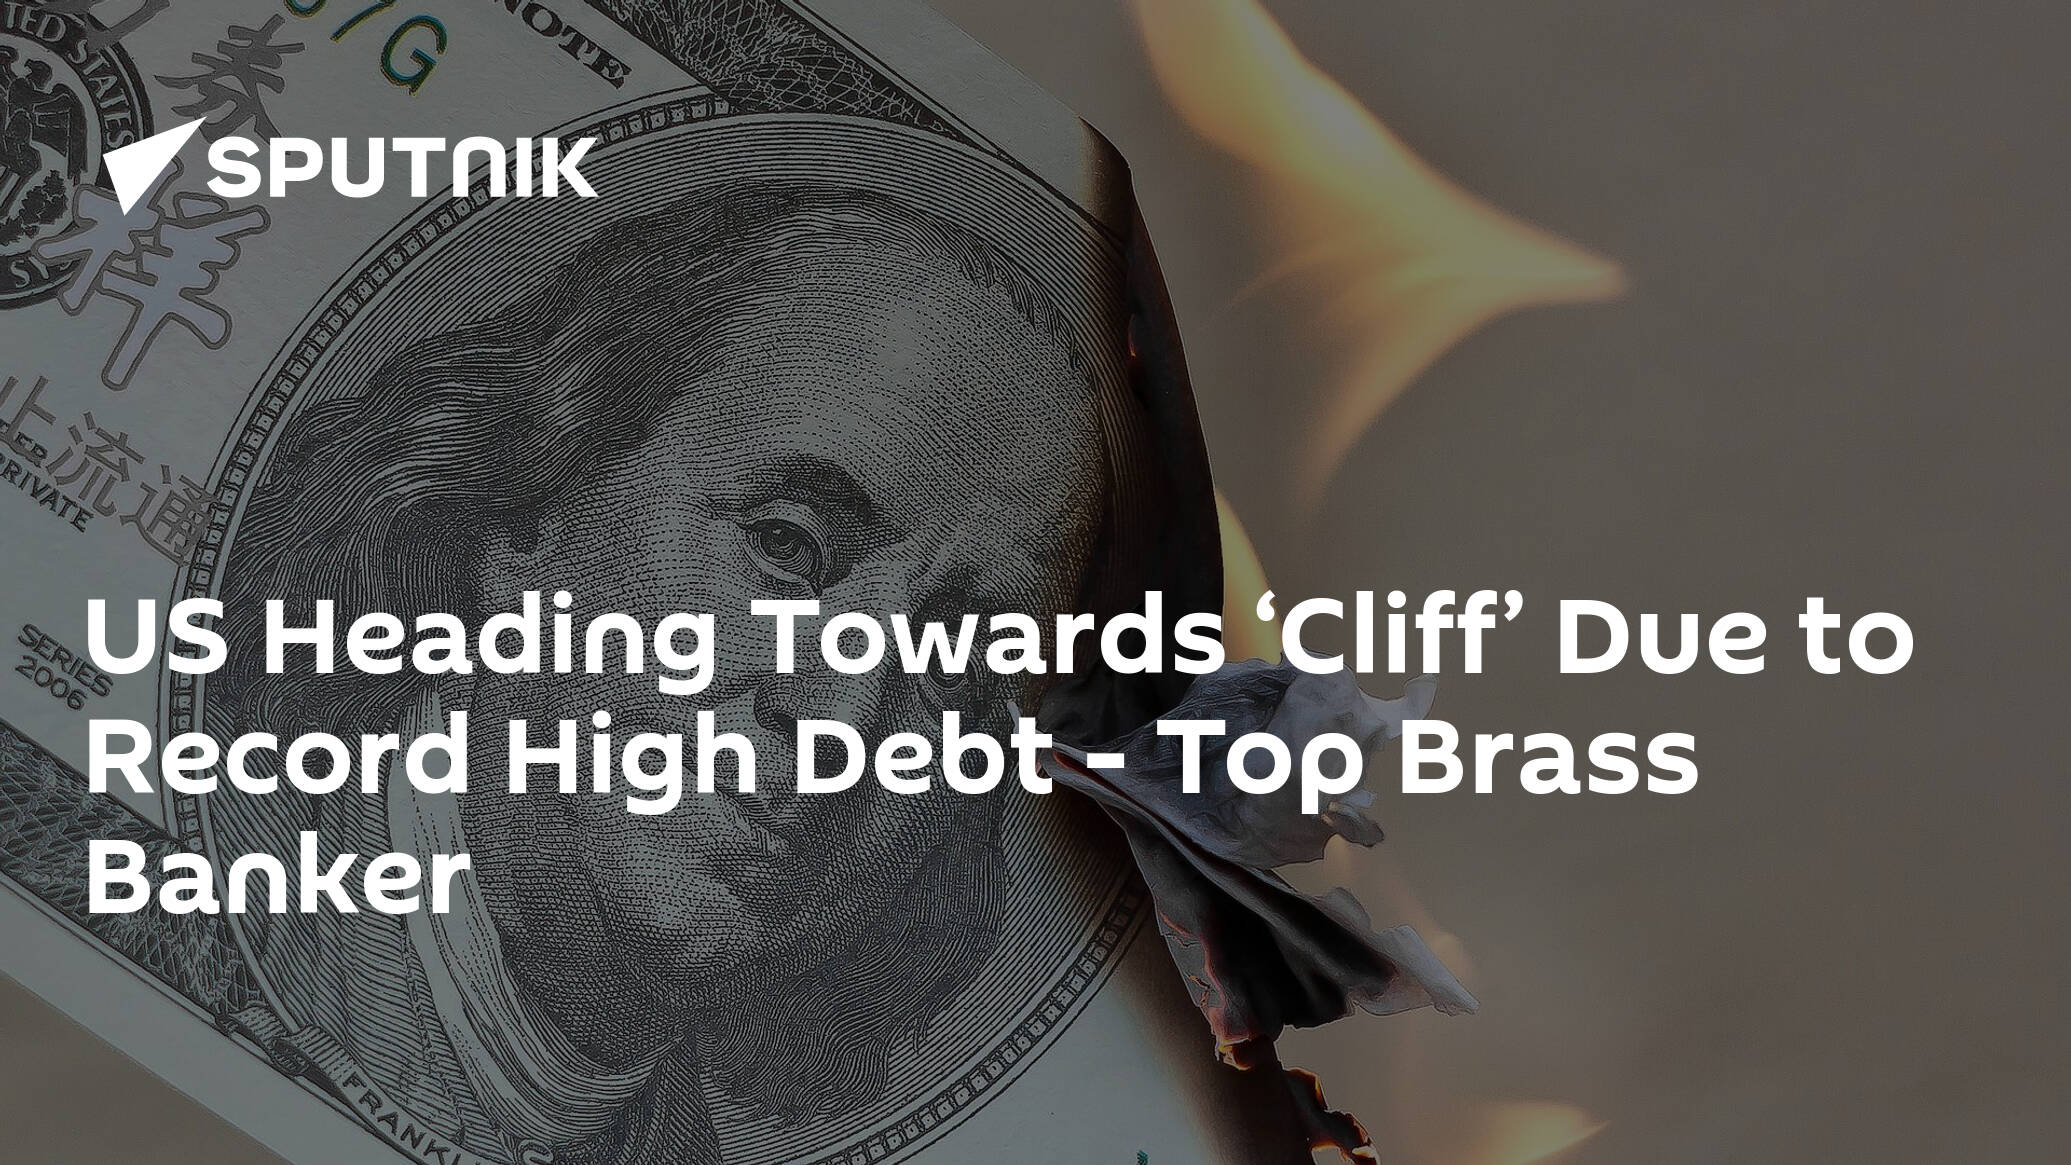 US Heading Towards ‘Cliff’ Due to Record High Debt – Top Brass Banker